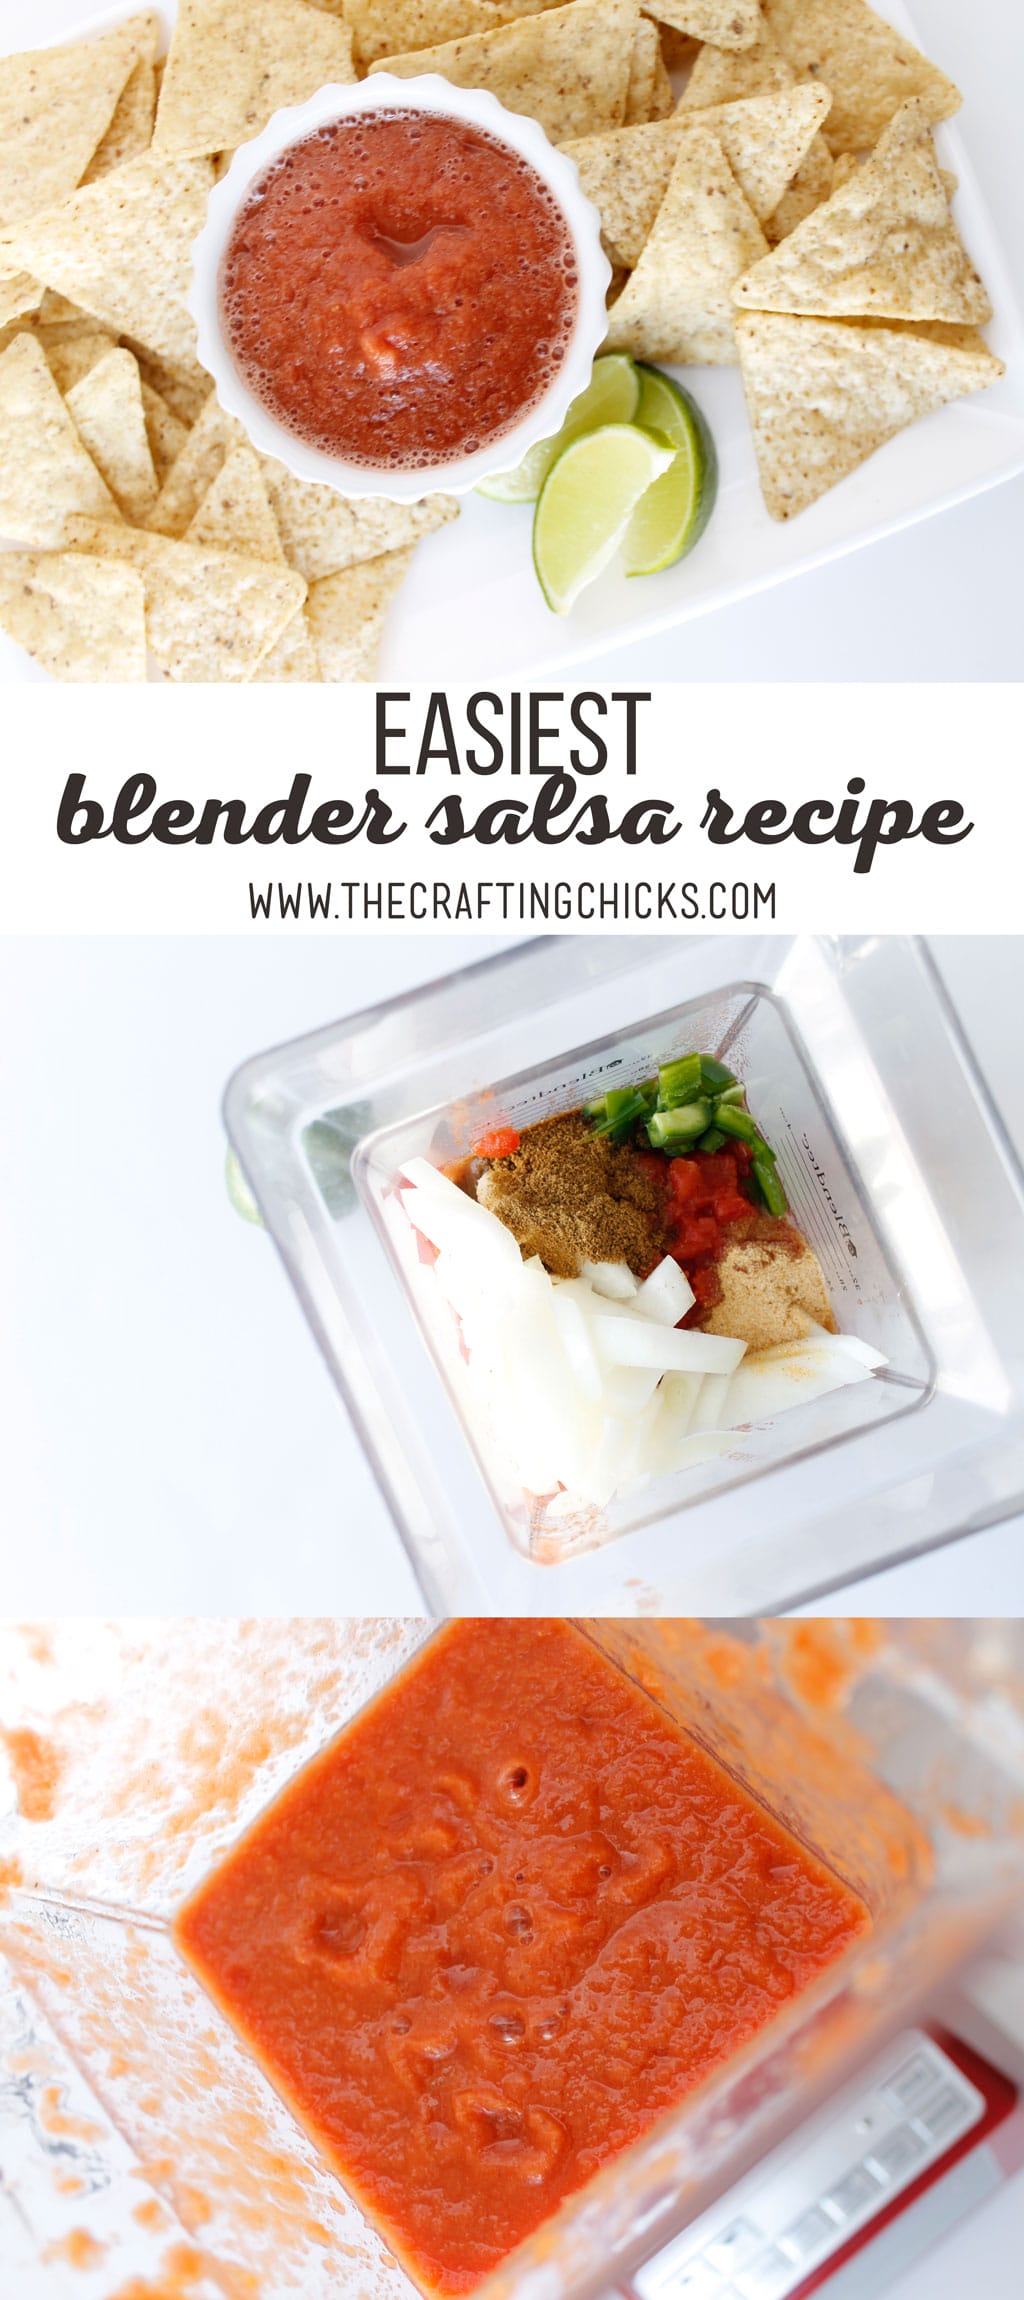 The Easiest Blender Salsa Recipe has become a staple at my house. This salsa can be made as chunky or puree as you want when you use a blender.